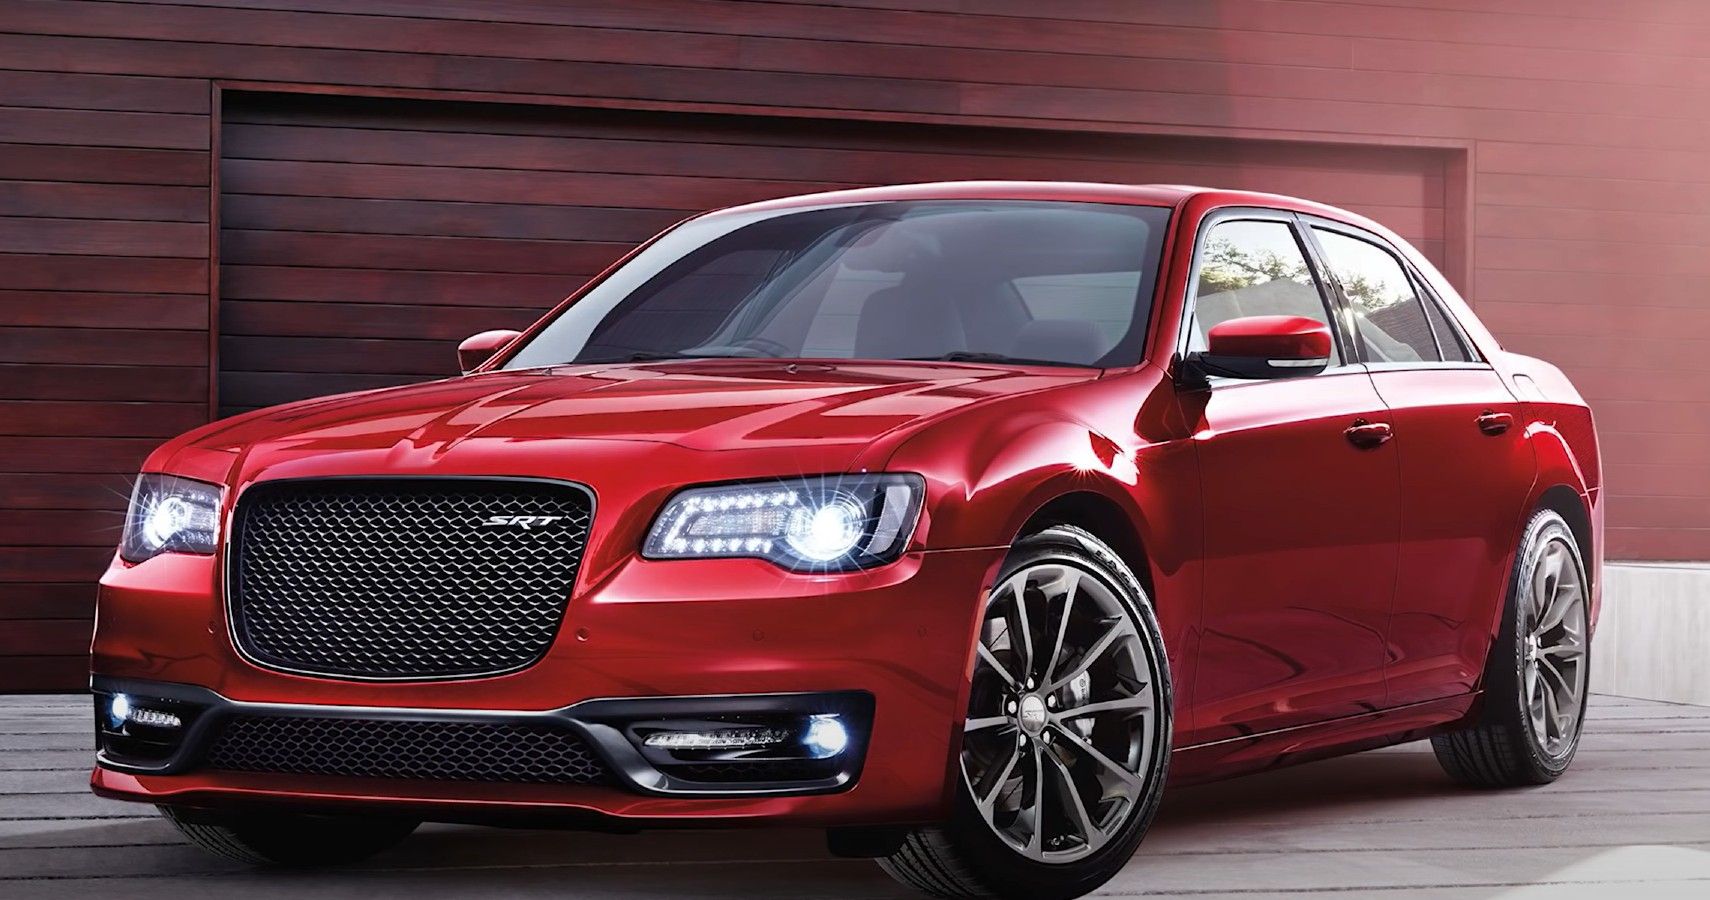 Here's What We Love About The 2022 Chrysler 300